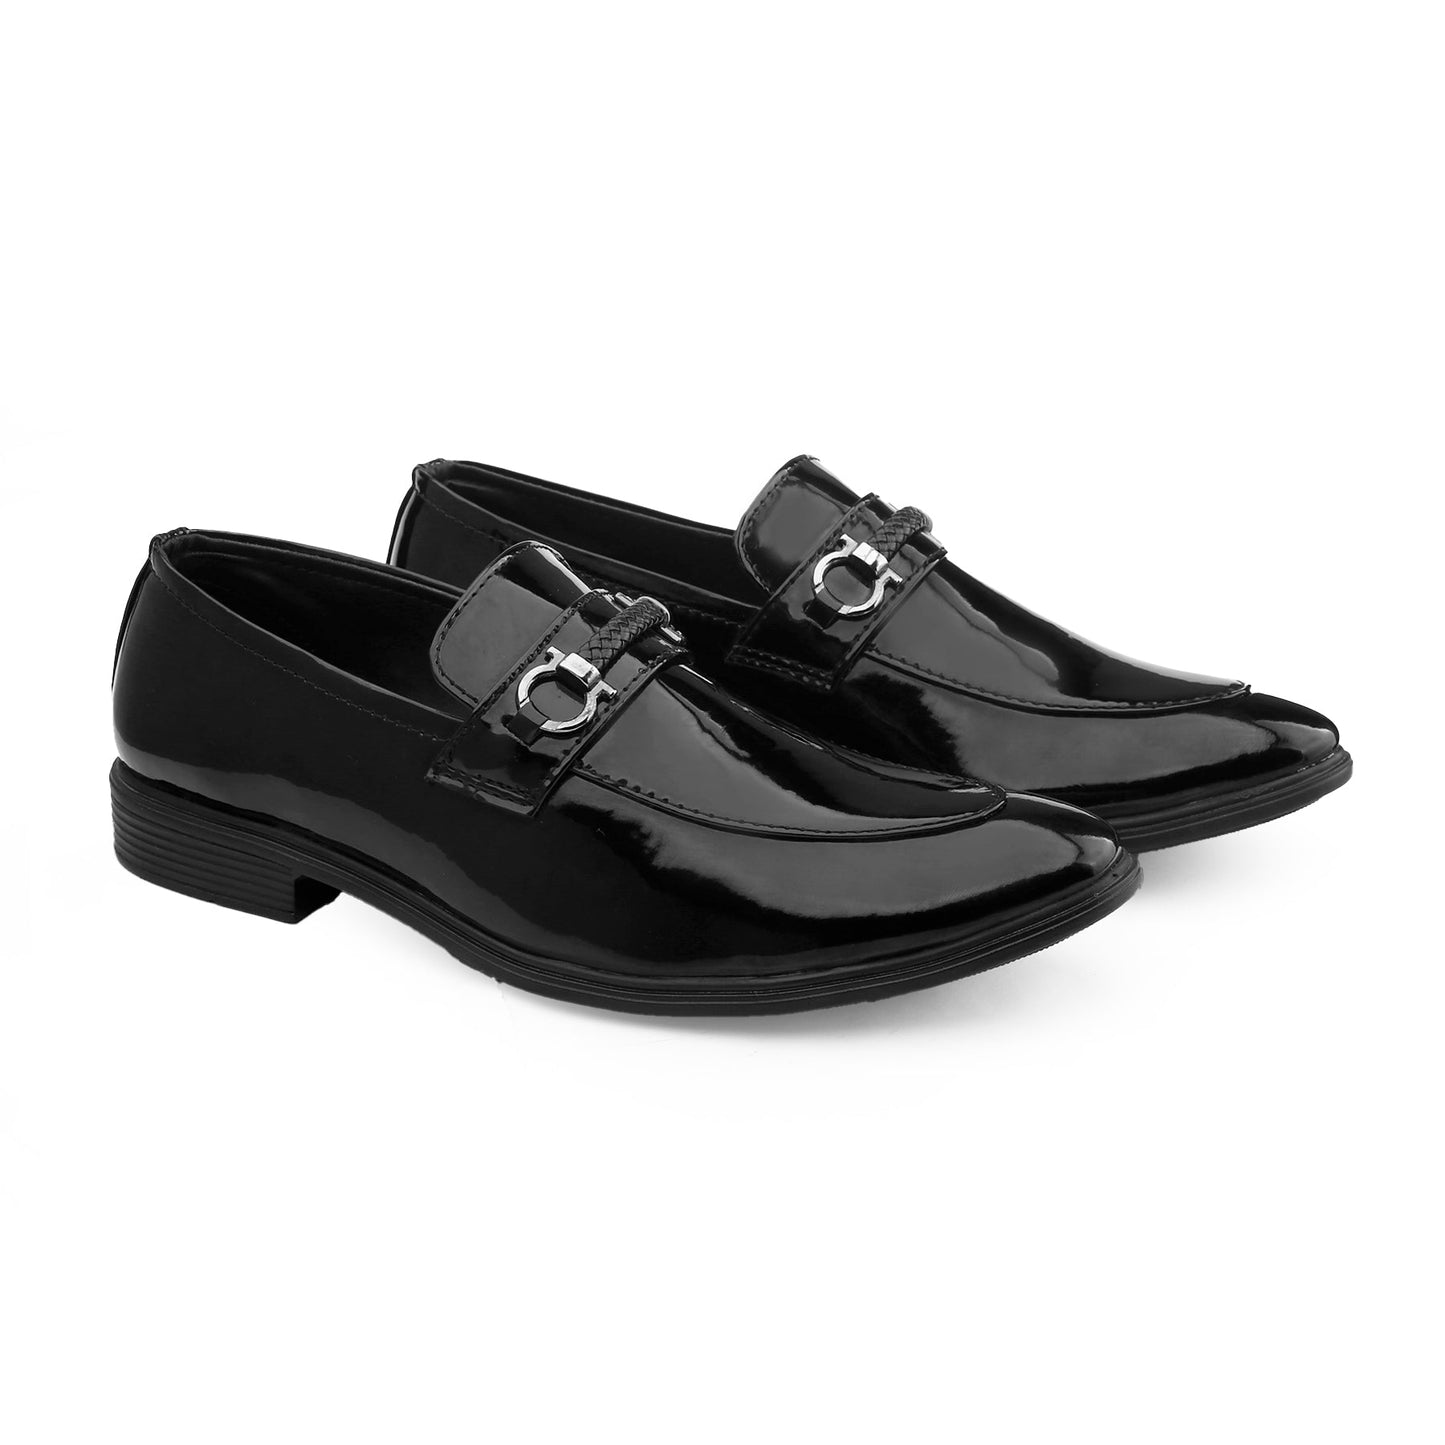 Men's Faux Leather Casual Stylish Loafers for all Seasons